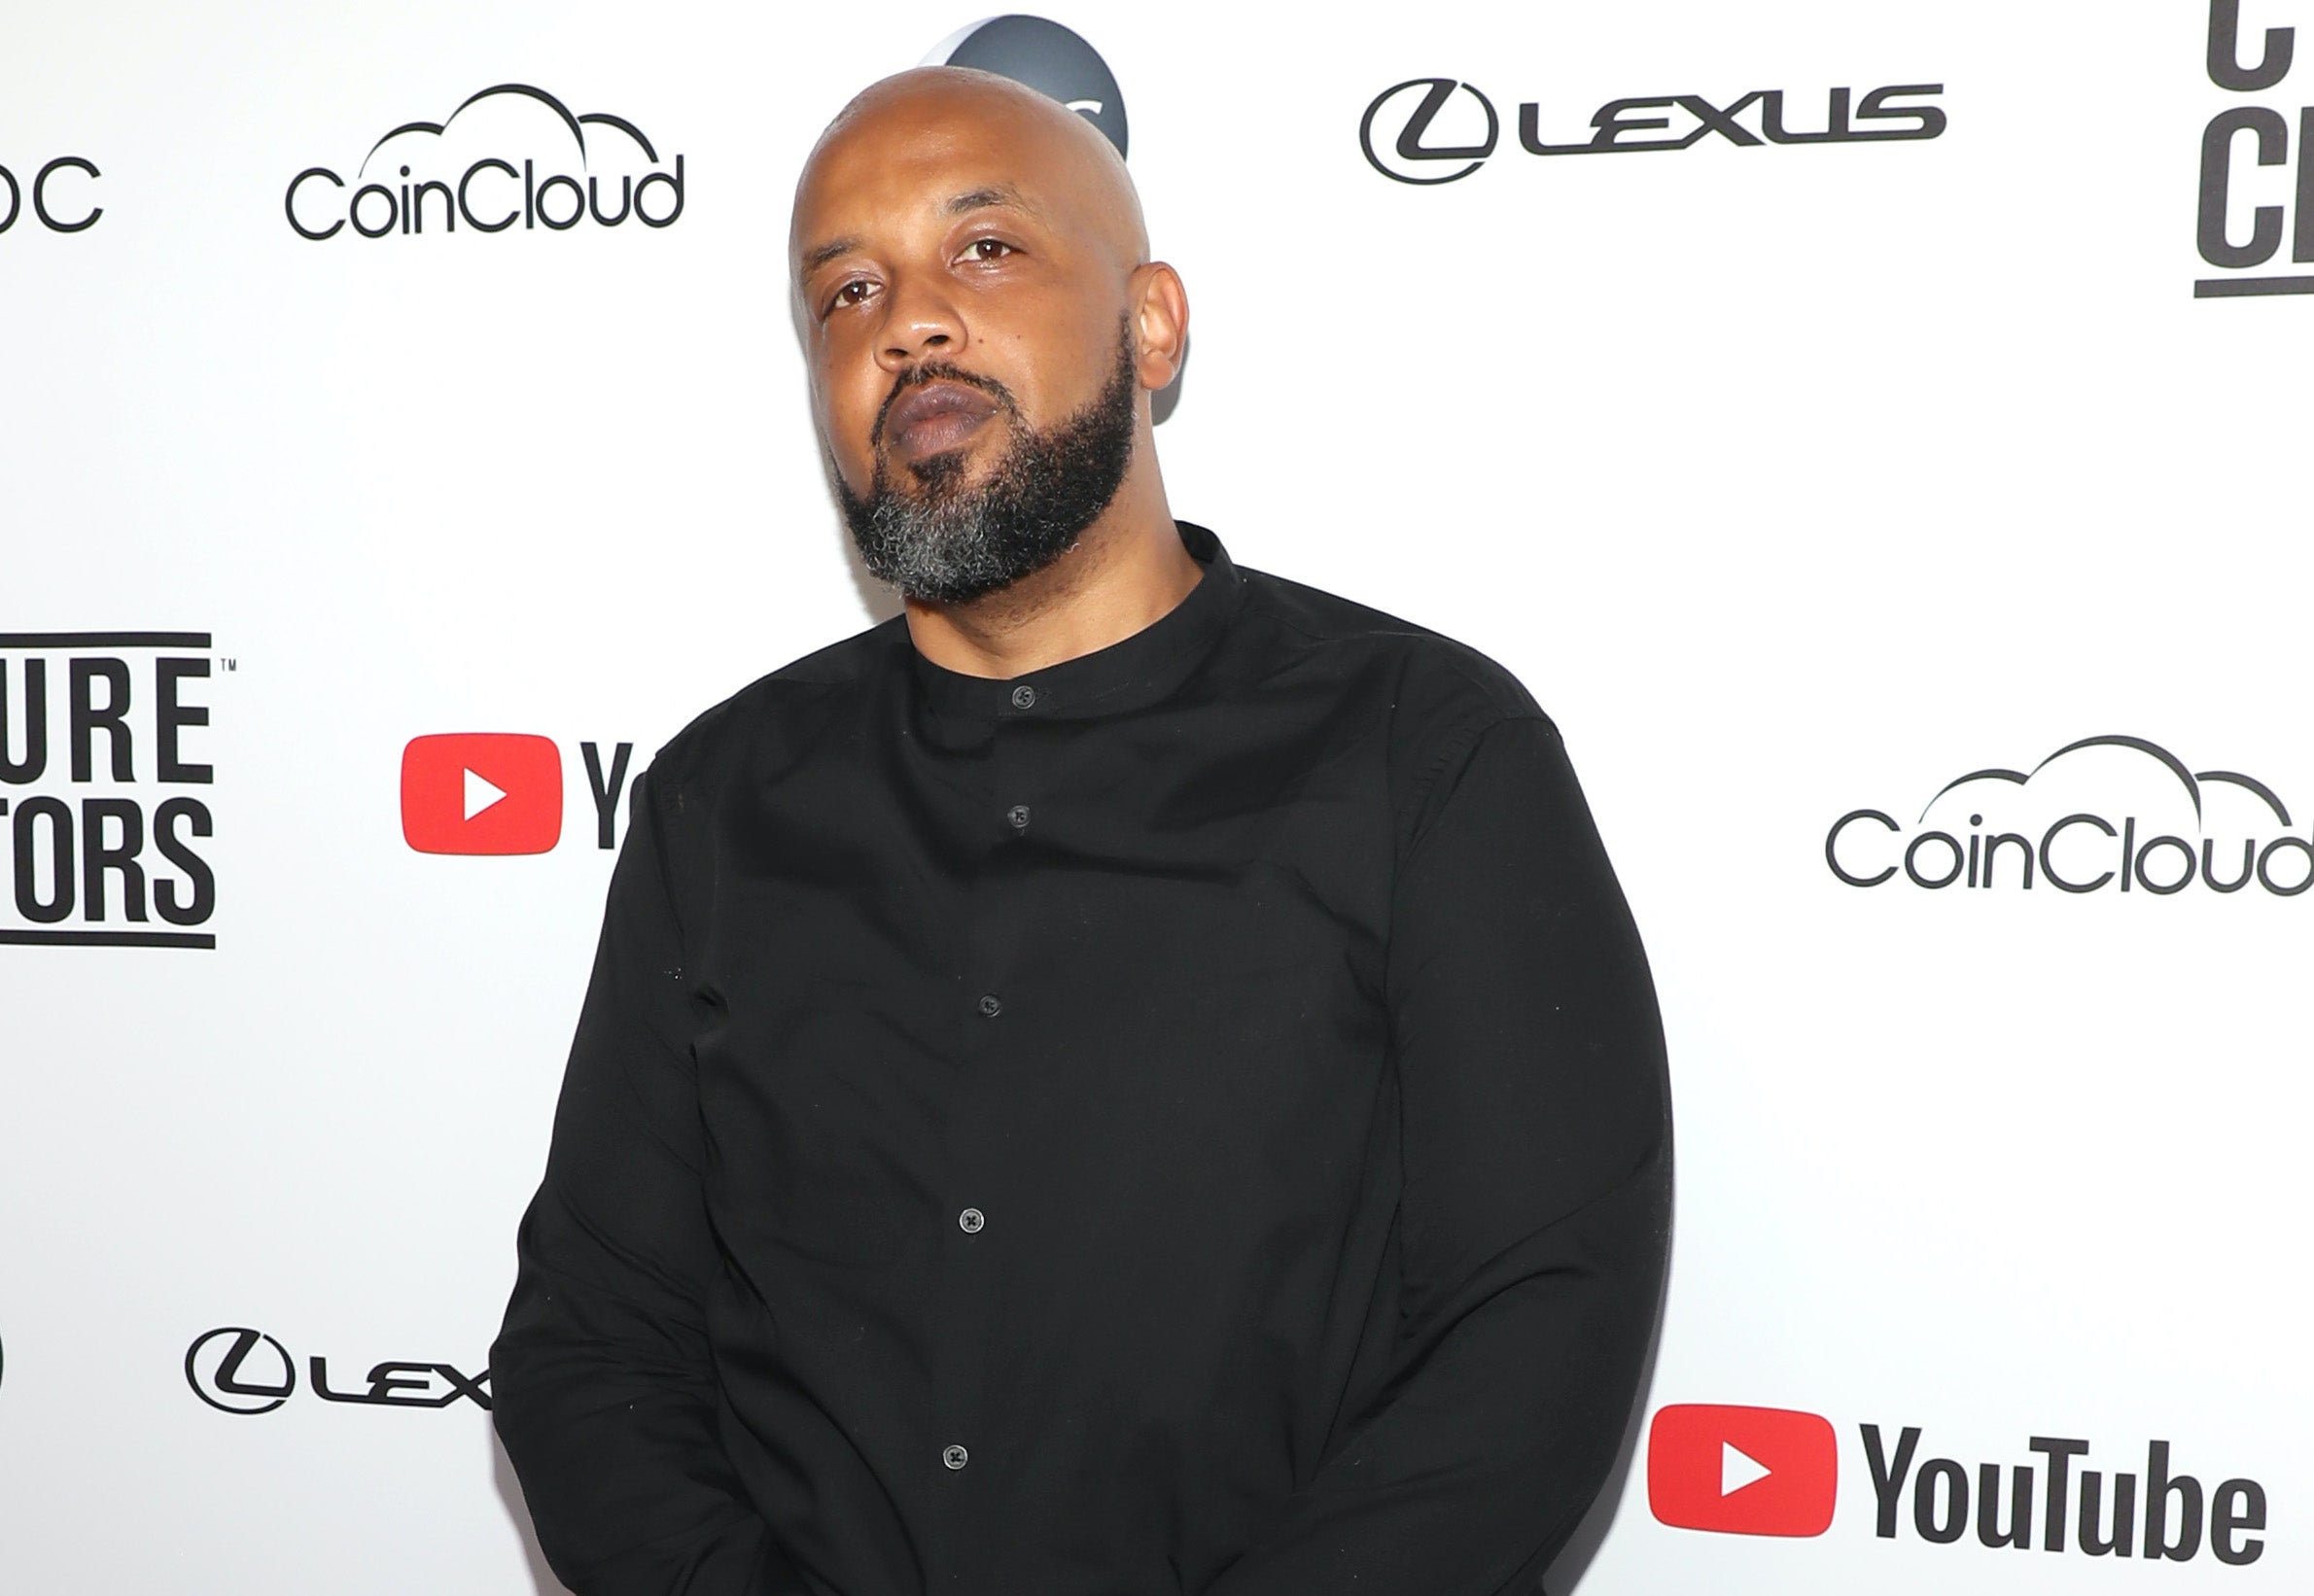 YouTube's Tuma Basa talks Keeping Things Dope for Black Artists on the platform, Announces #YouTubeBlack Voices Music Class of 2022